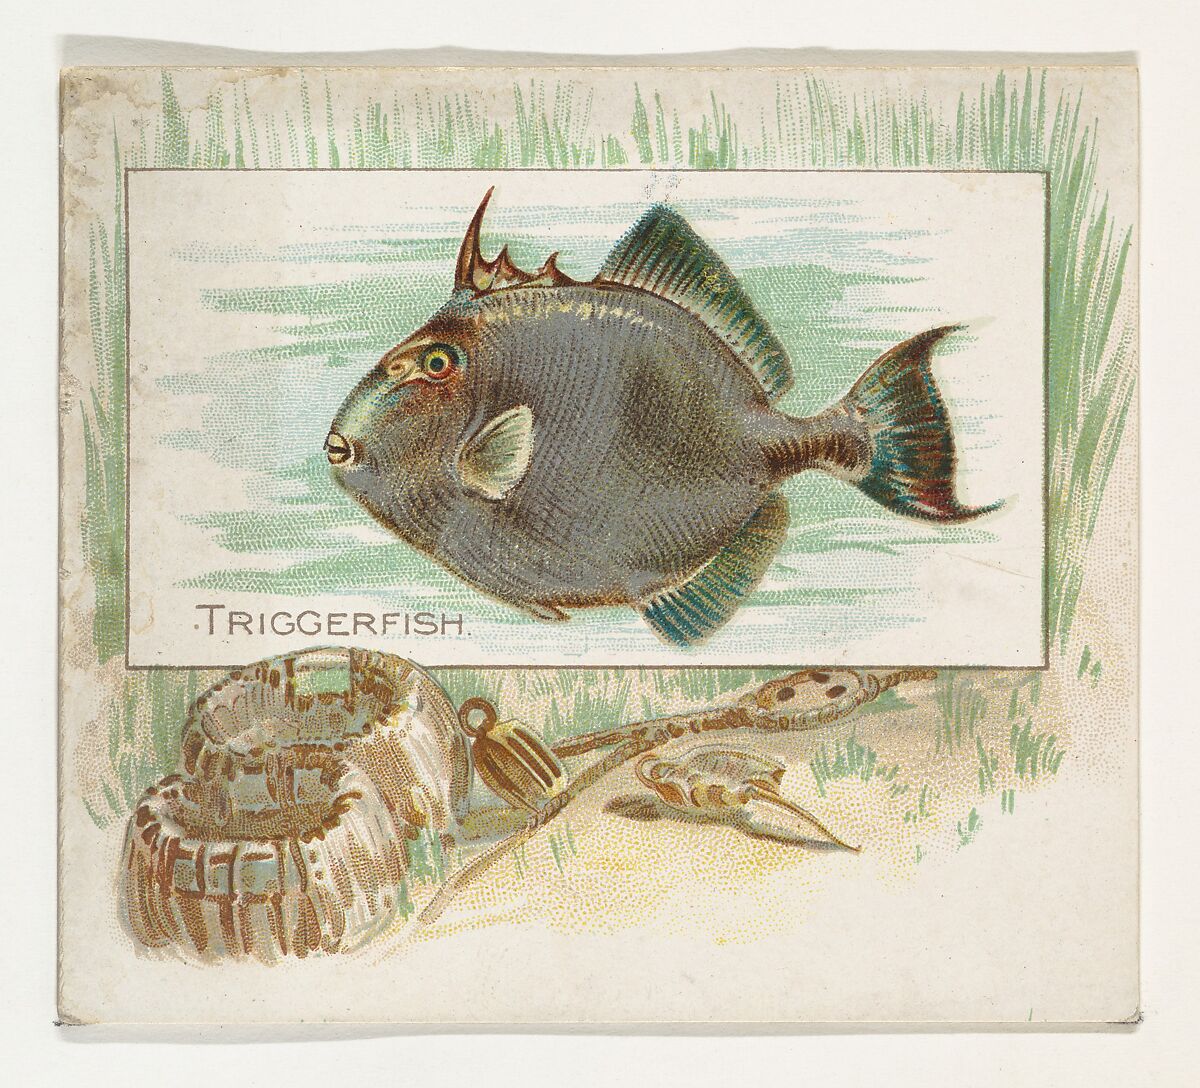 Triggerfish, from Fish from American Waters series (N39) for Allen & Ginter Cigarettes, Issued by Allen &amp; Ginter (American, Richmond, Virginia), Commercial color lithograph 